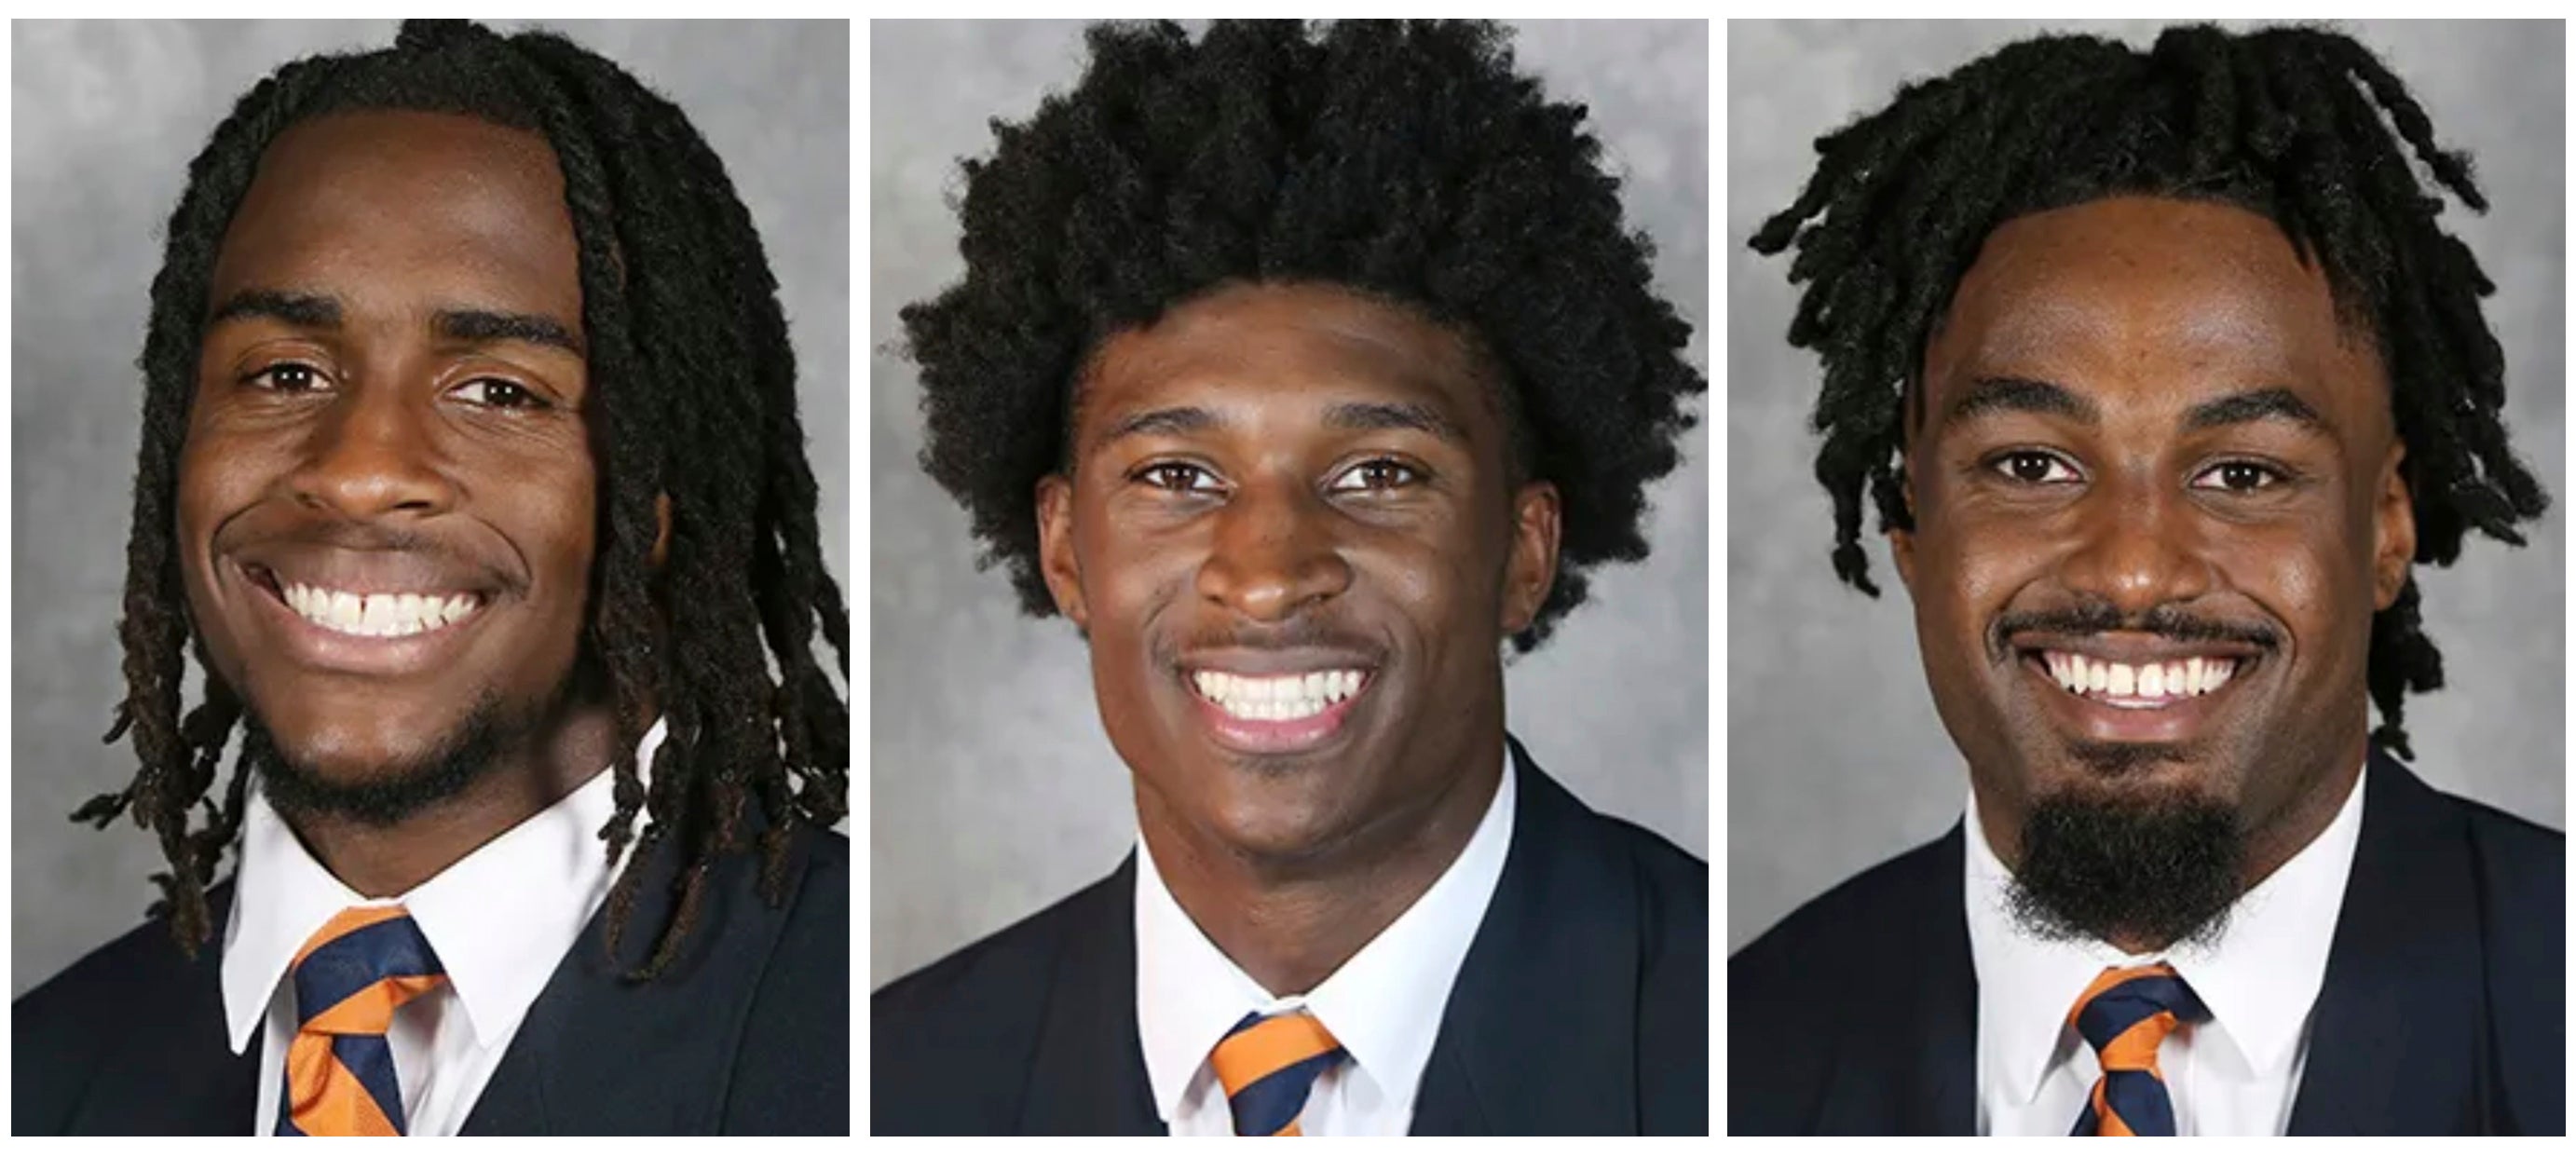 D’Sean Perry, Lavel Davis Jr, and Devin Chandler were killed during the violence